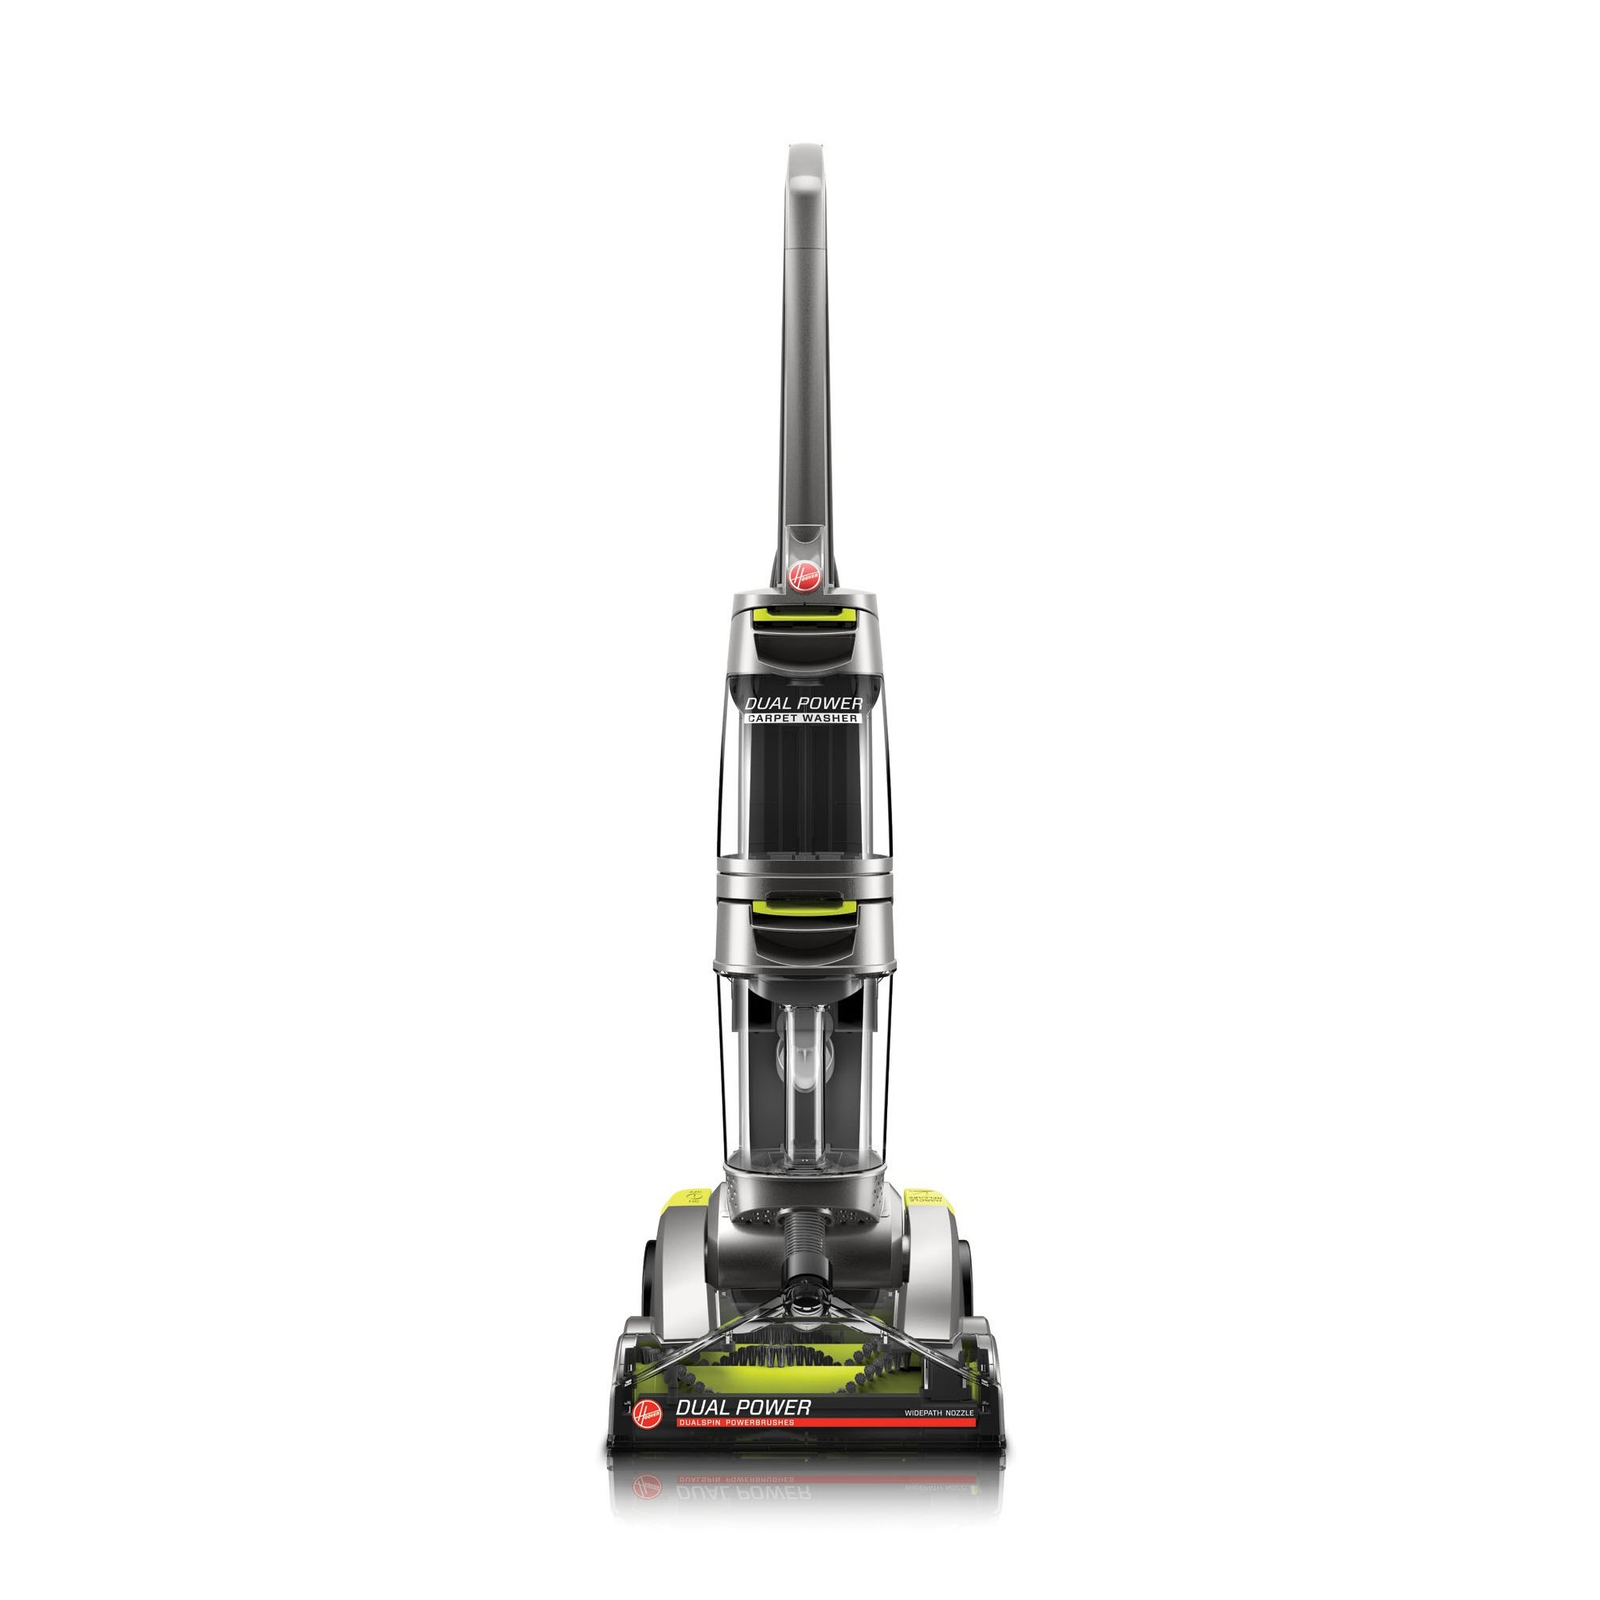 Hoover Dual Power Upright Carpet Cleaner, -FH50900 - image 1 of 6